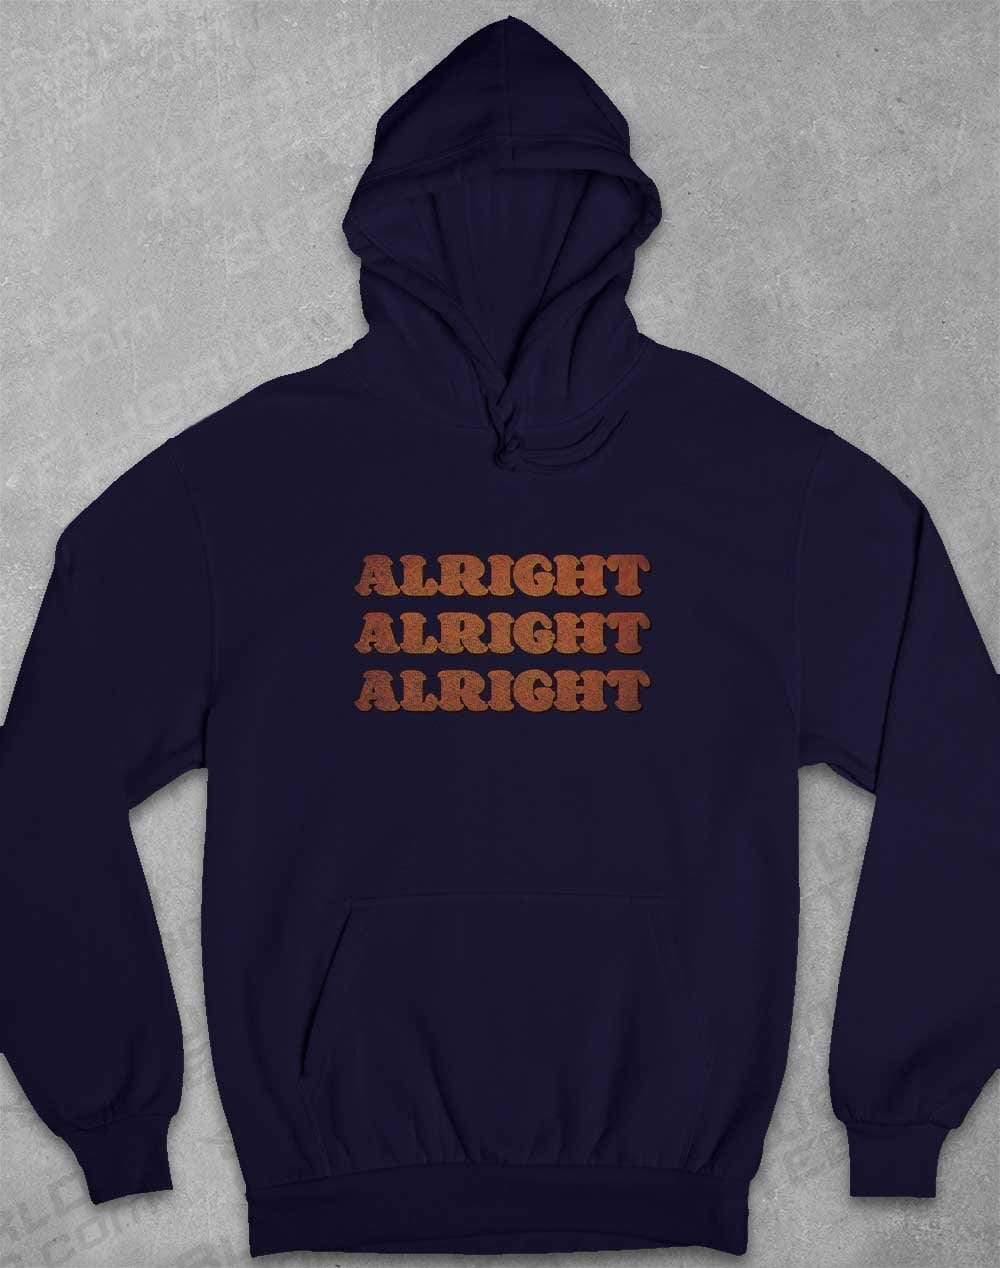 Alright Alright Alright Hoodie XS / Oxford Navy  - Off World Tees